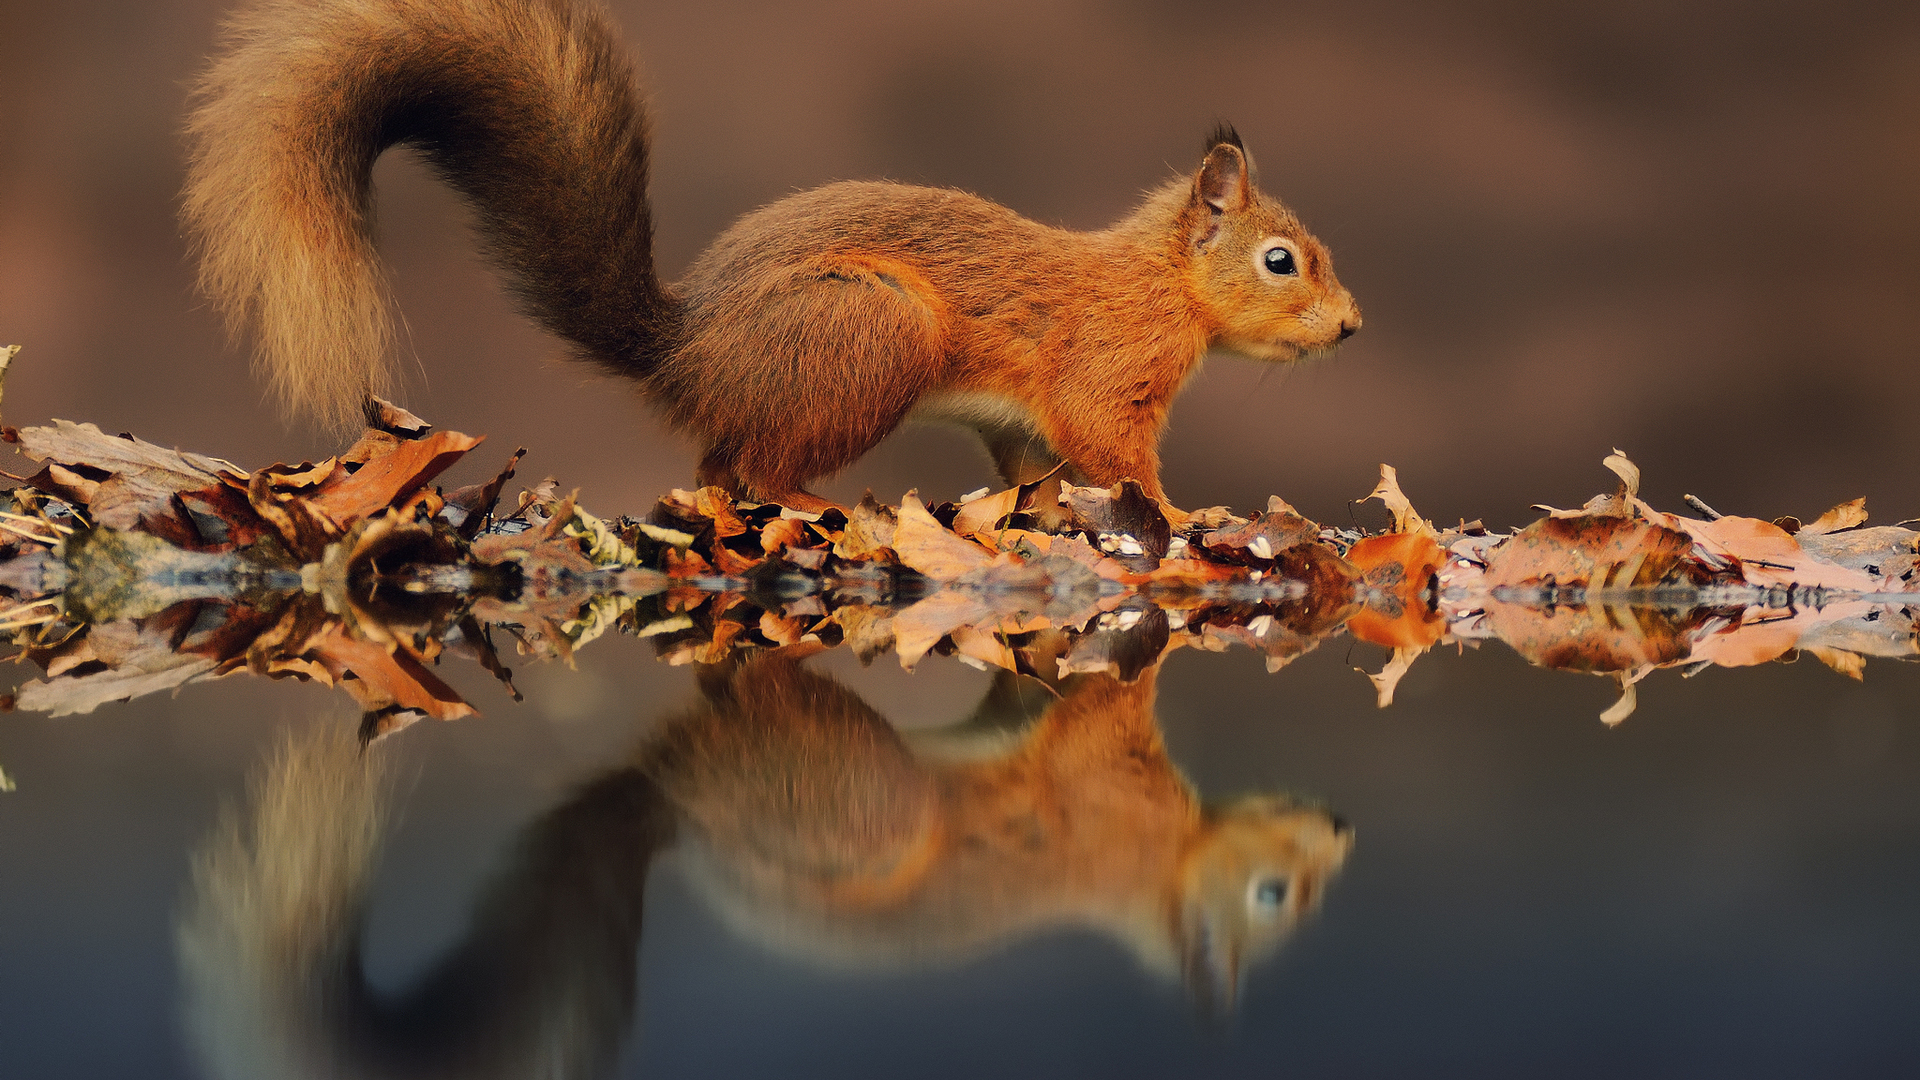 Squirrel Wallpapers Images Photos Pictures Backgrounds